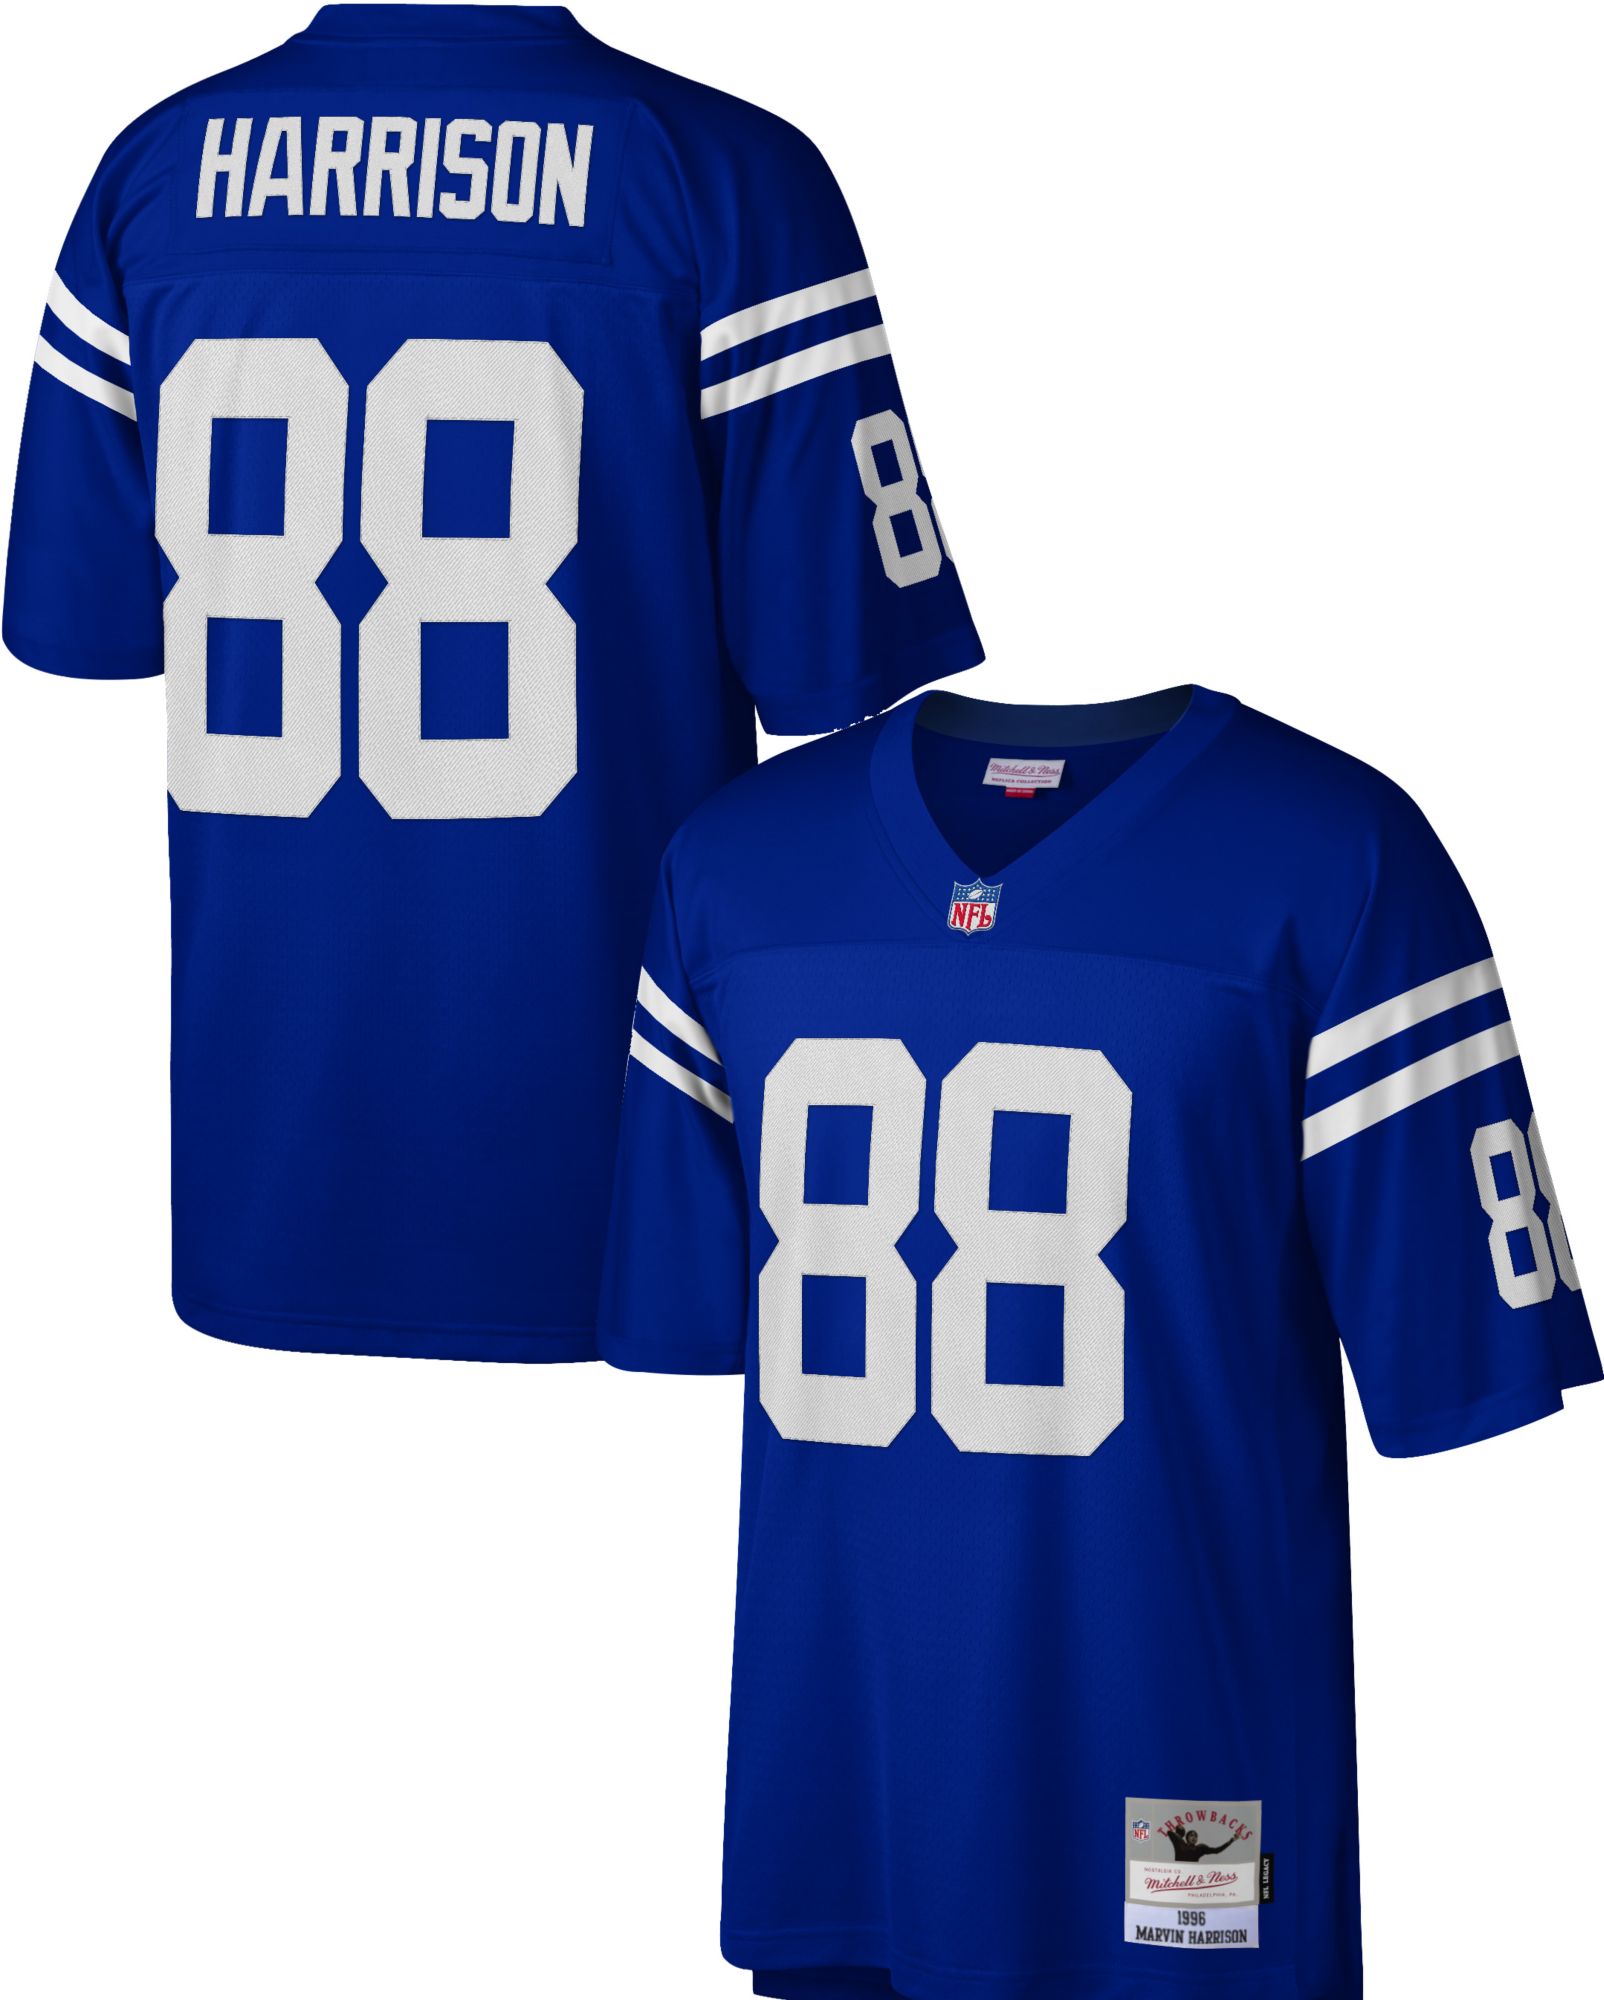 Indianapolis Colts player jersey fan base